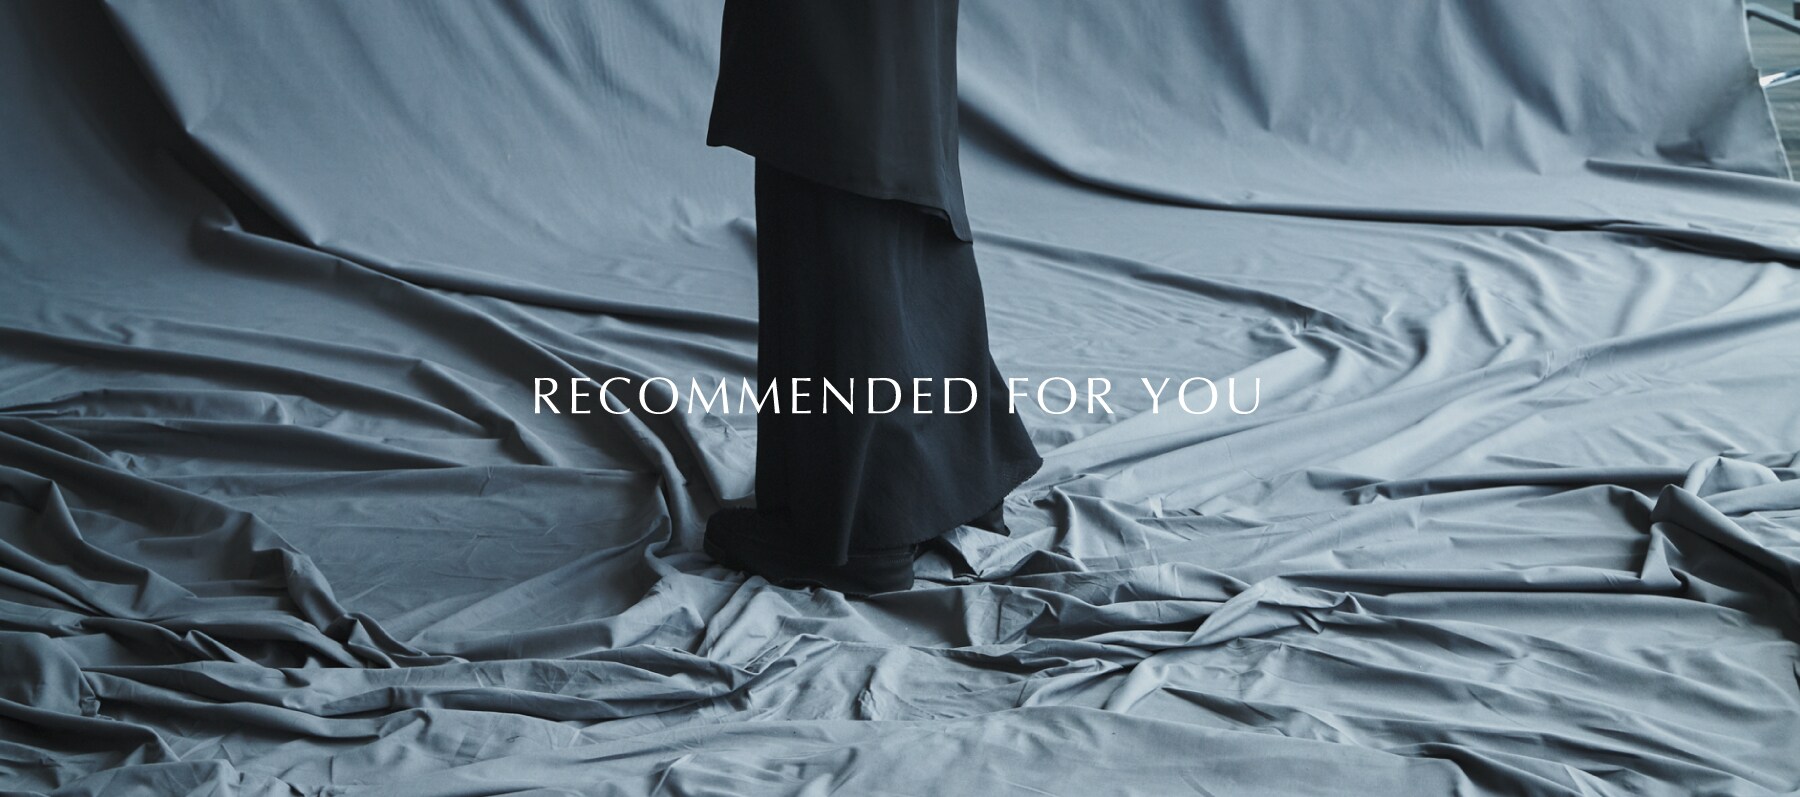 RECOMMENDED_FOR_YOU